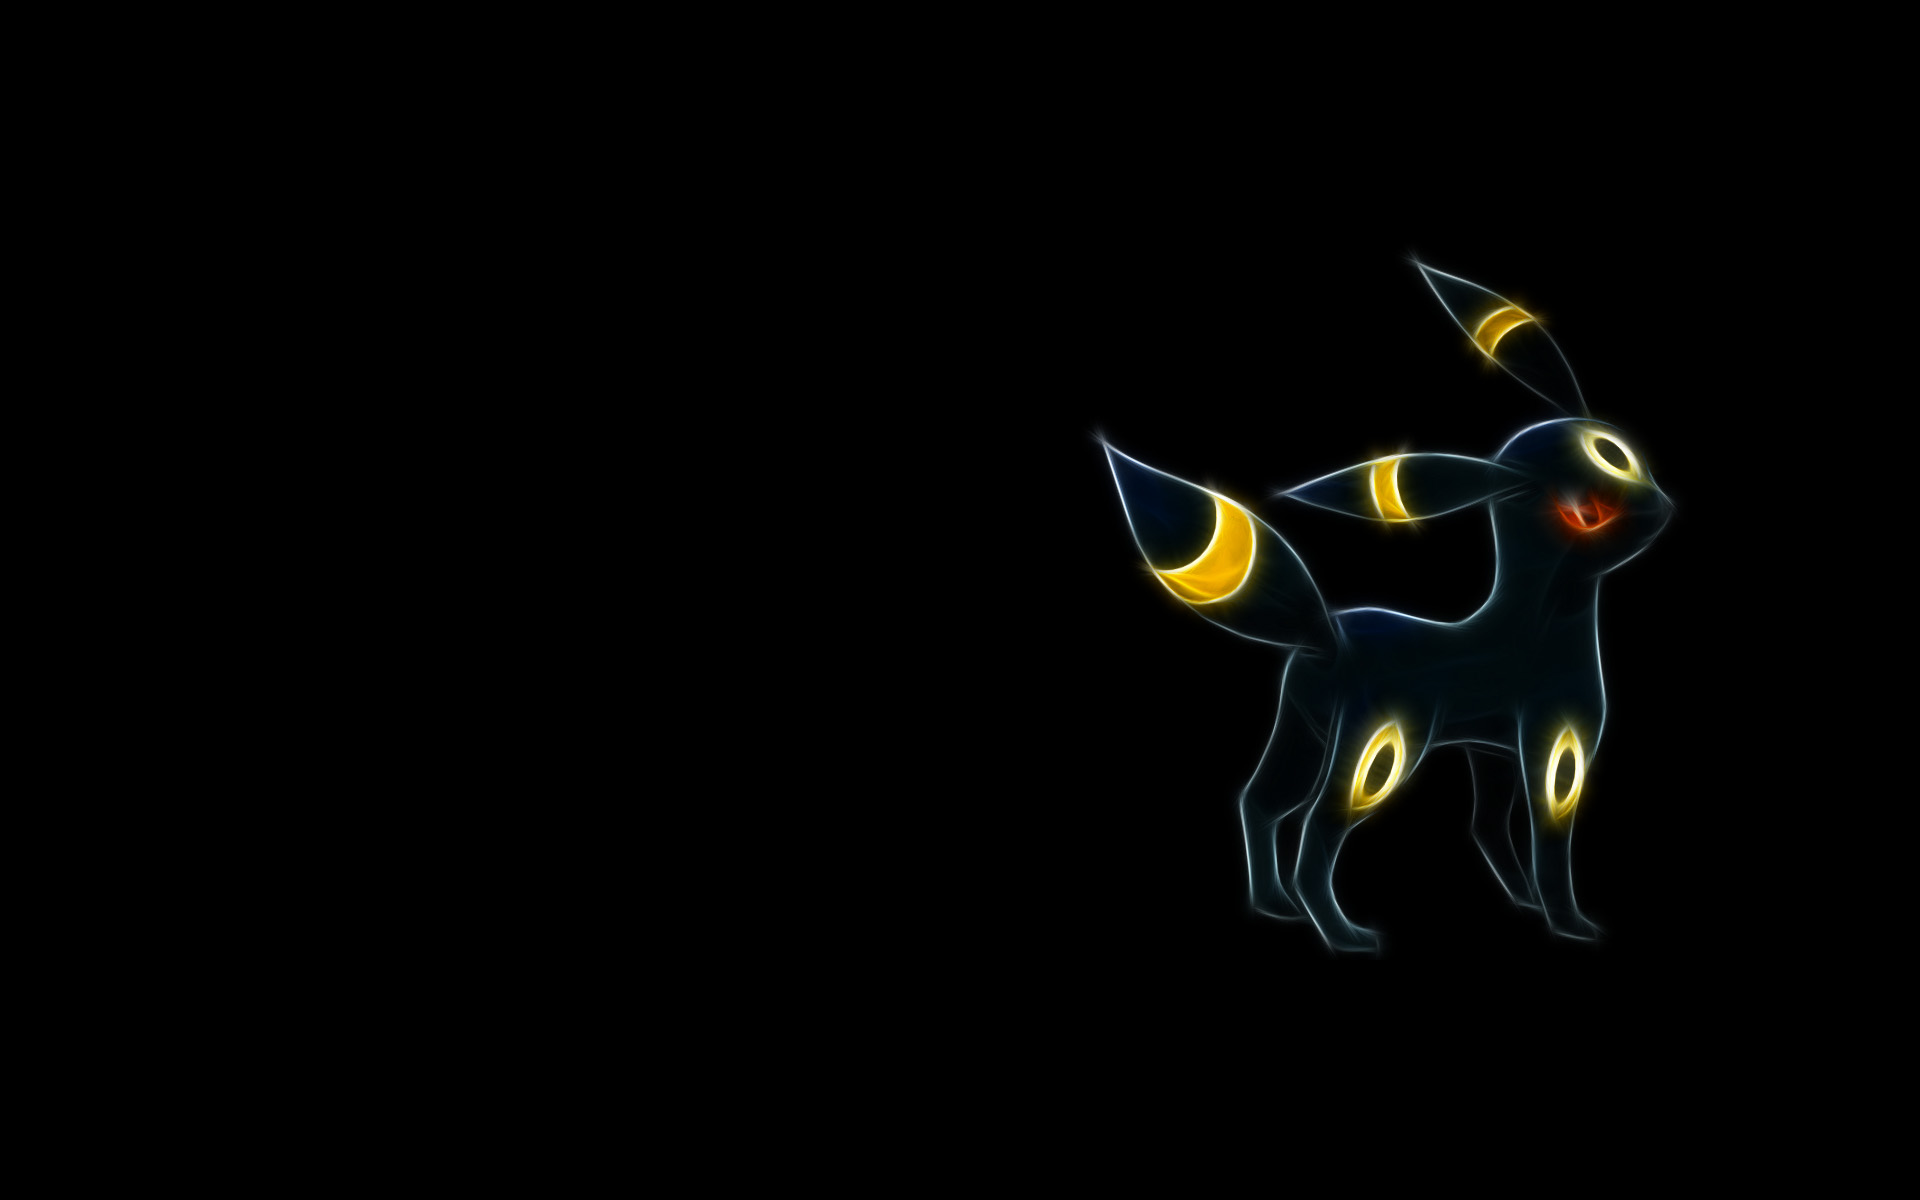 Dark Pokémon wallpapers for desktop, download free Dark Pokémon pictures  and backgrounds for PC 